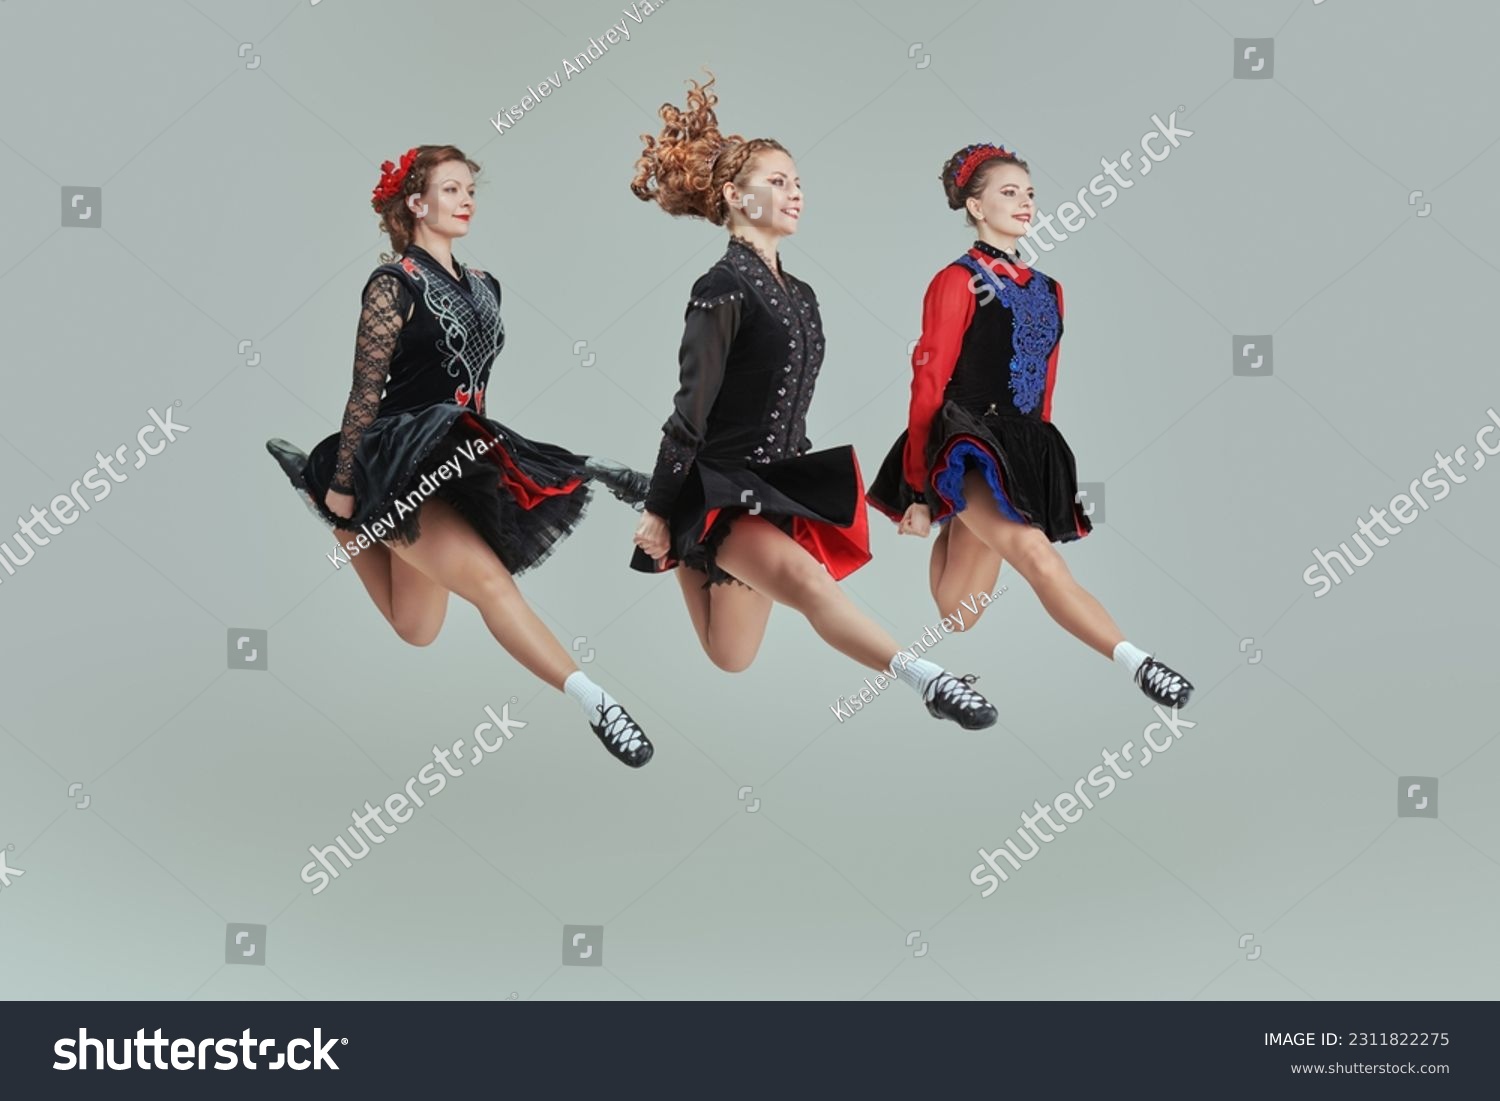 Three professional women of Irish dance ensemble in concert costumes and Ghillies Soft Shoes jump together in a row. Full-length studio portrait on a grey background. #2311822275